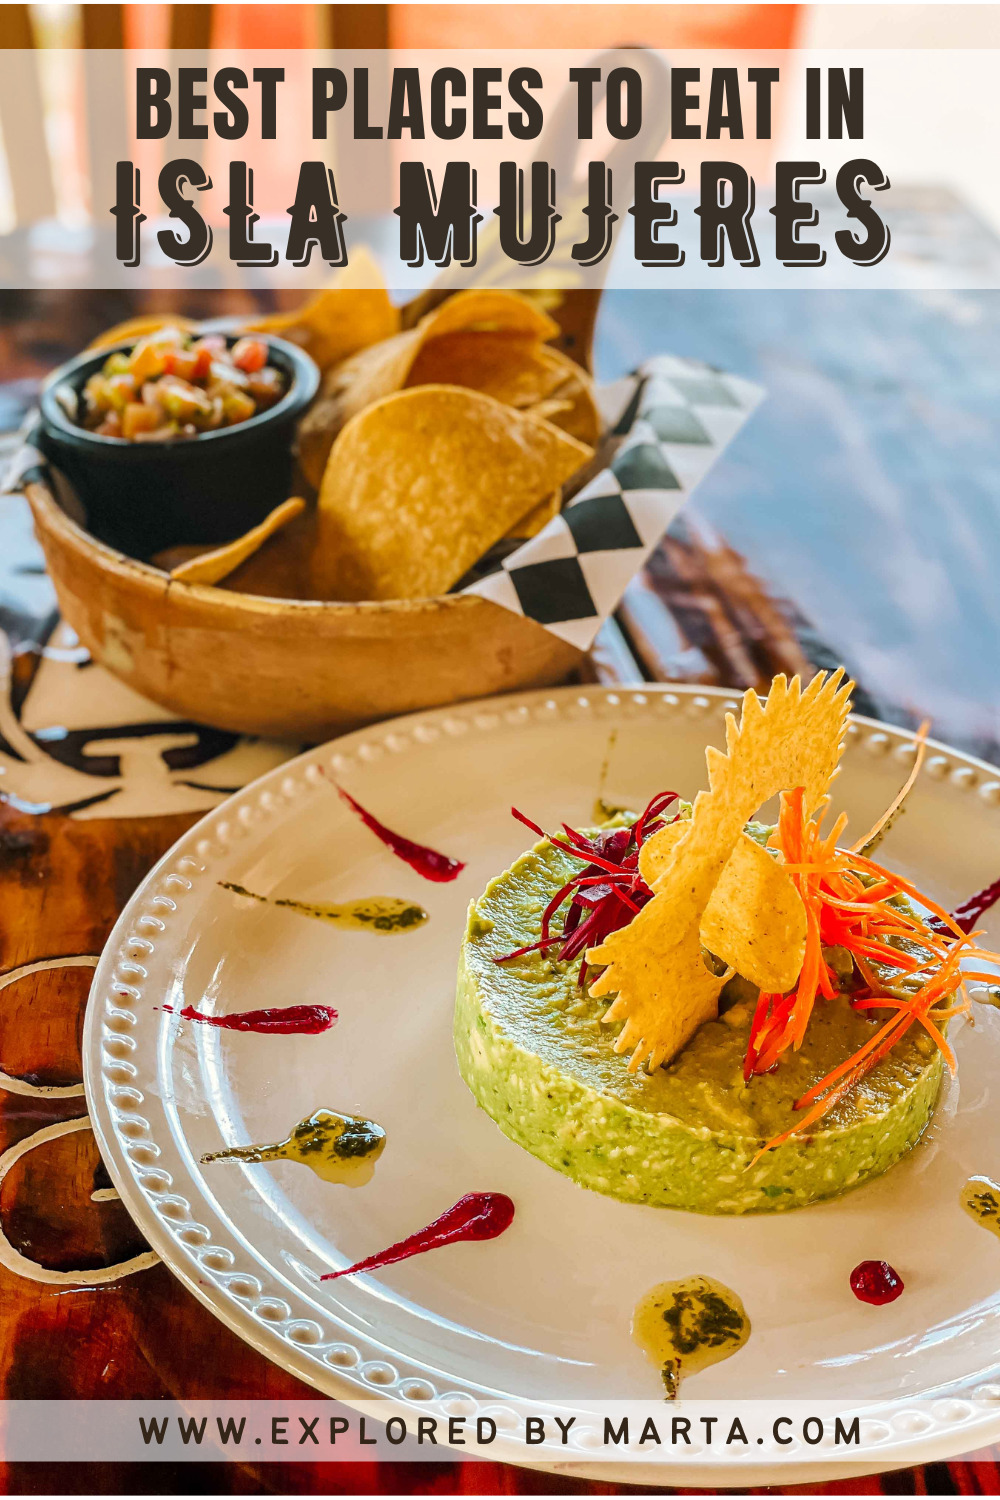 Best restaurants and places to eat in Isla Mujeres in Mexico